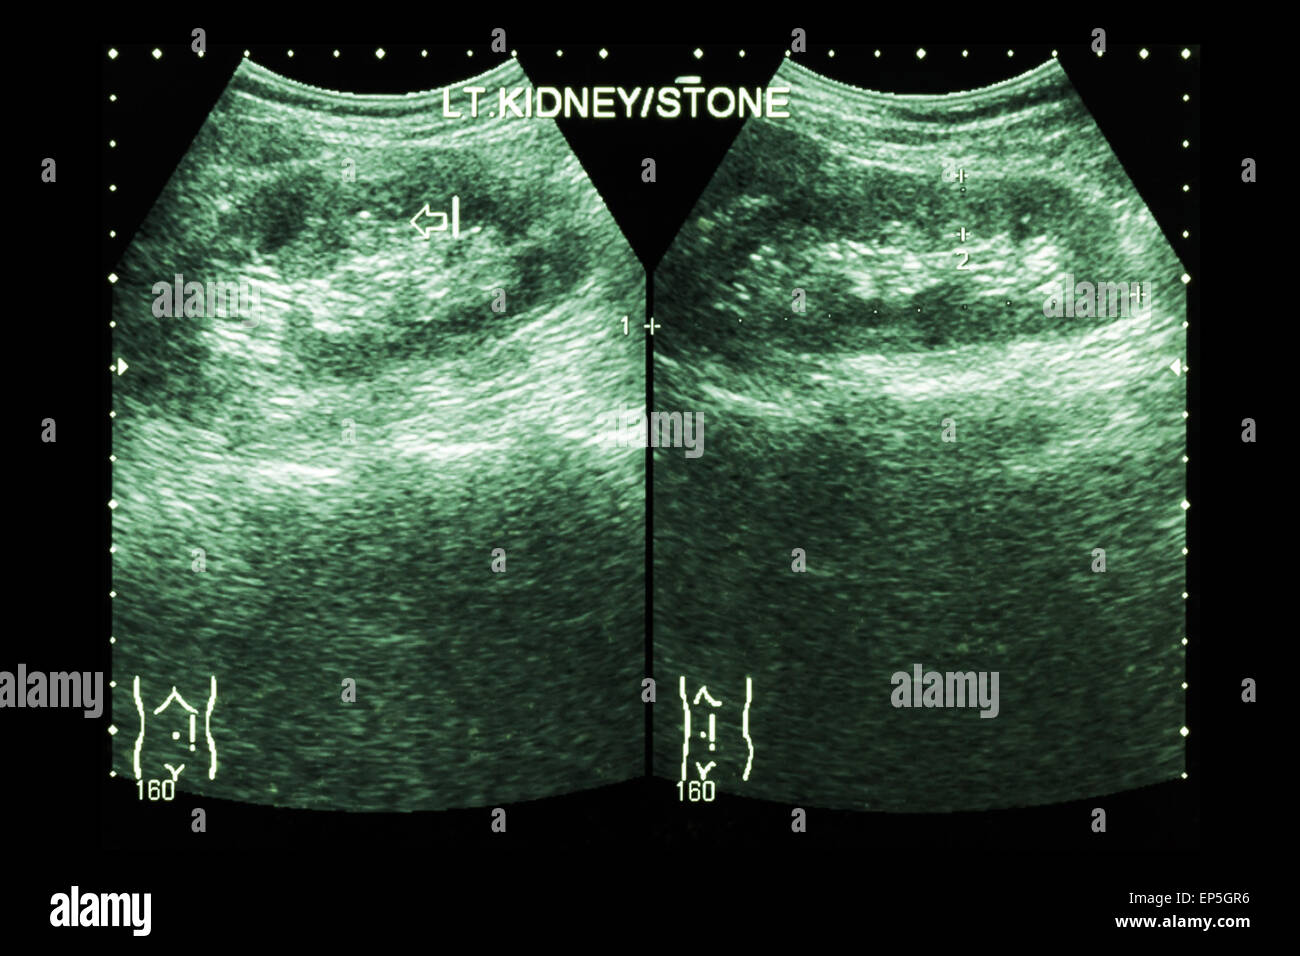 Ultrasonography of kidney : show left kidney stone ( 2 image for compare ) Stock Photo